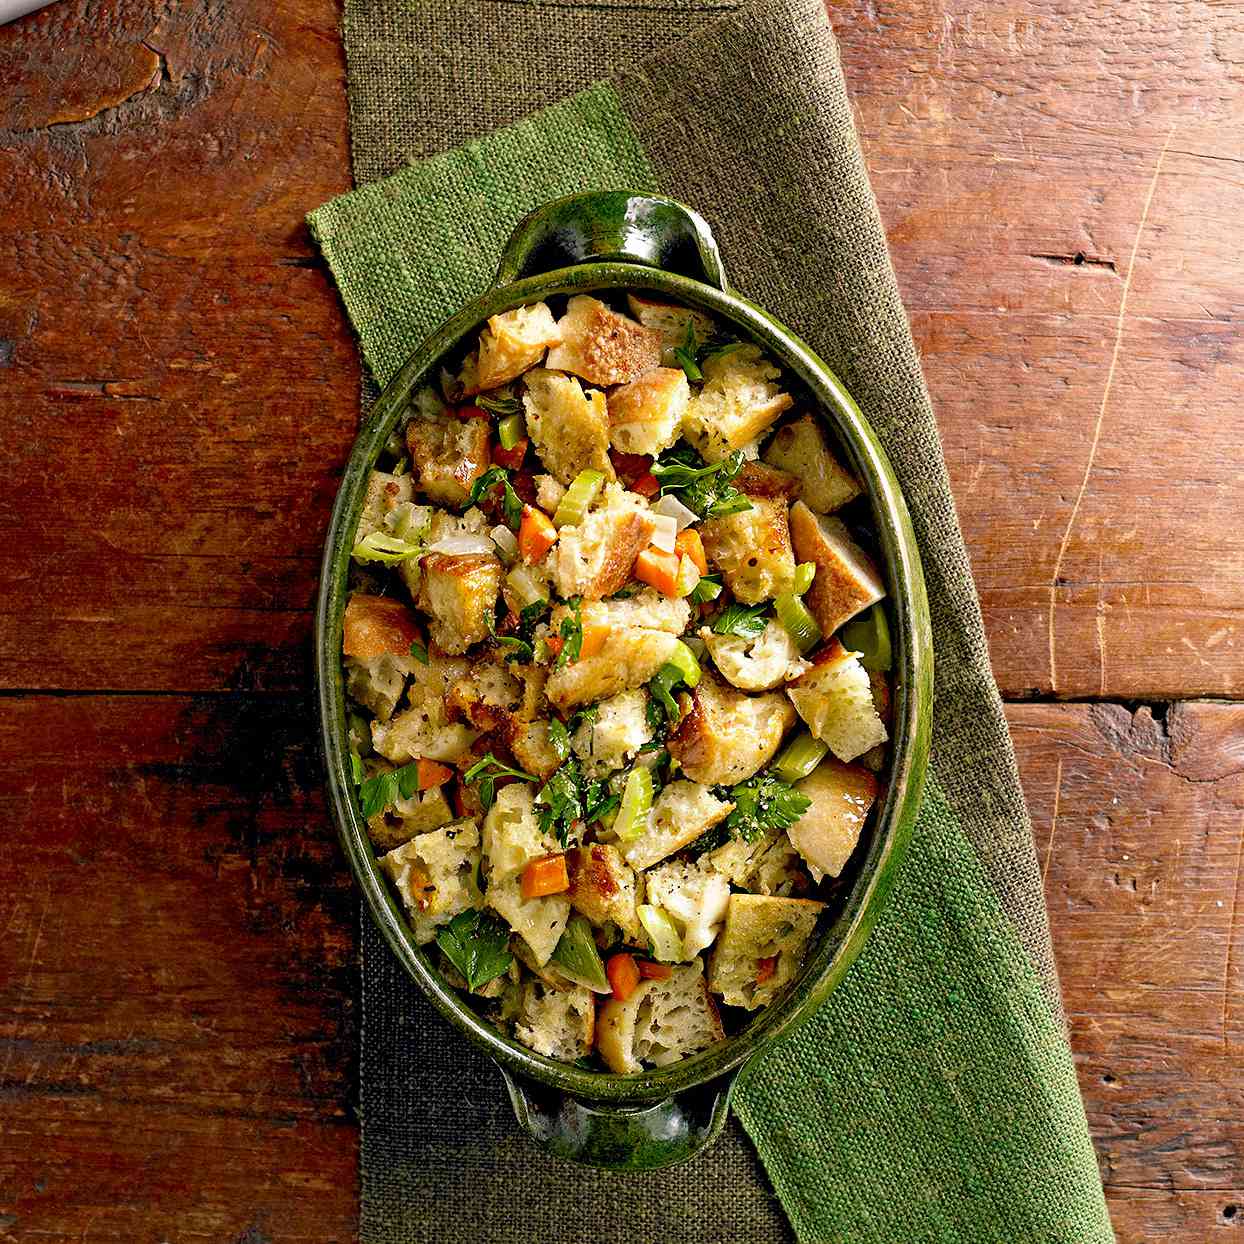 Old-Fashioned Bread Stuffing